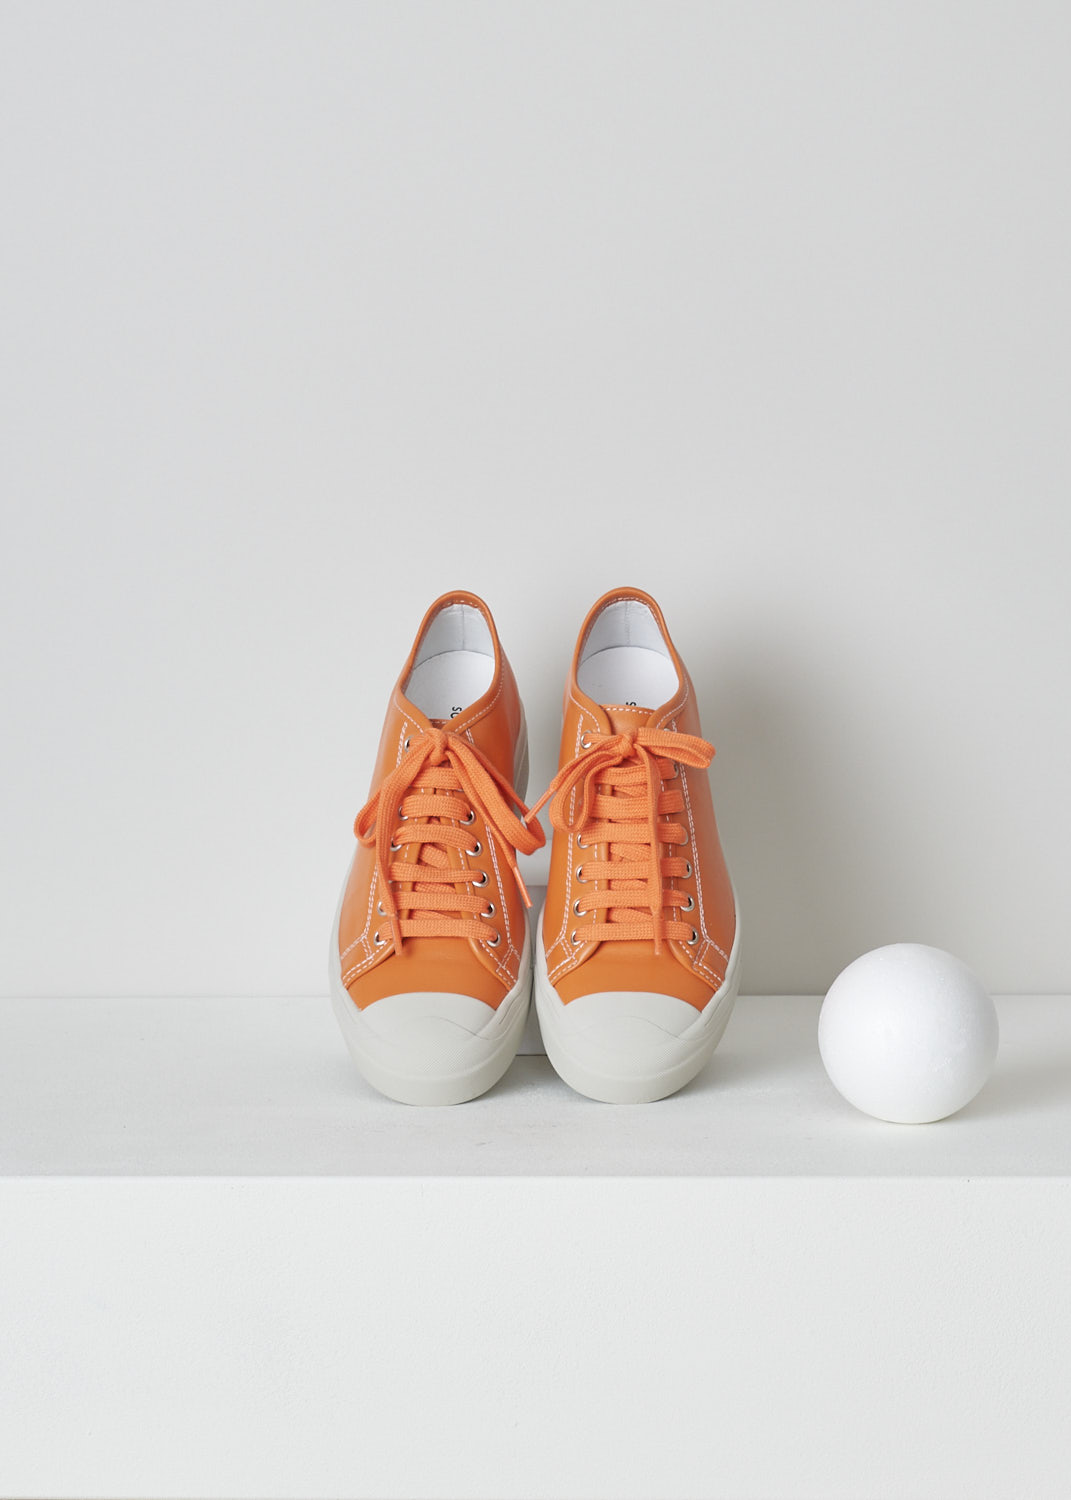 SOFIE Dâ€™HOORE, ORANGE LEATHER SHOES, FOLK_LMAST_LMAST_ORANGE, Orange, Top, These orange leather sneakers feature a front lace-up closure with orange laces. These sneakers have a round toe with a white rubber toe cap that goes down into the white rubber sole. Contrasting white stitching is used throughout. The sneakers come with an additional pair of white laces.
